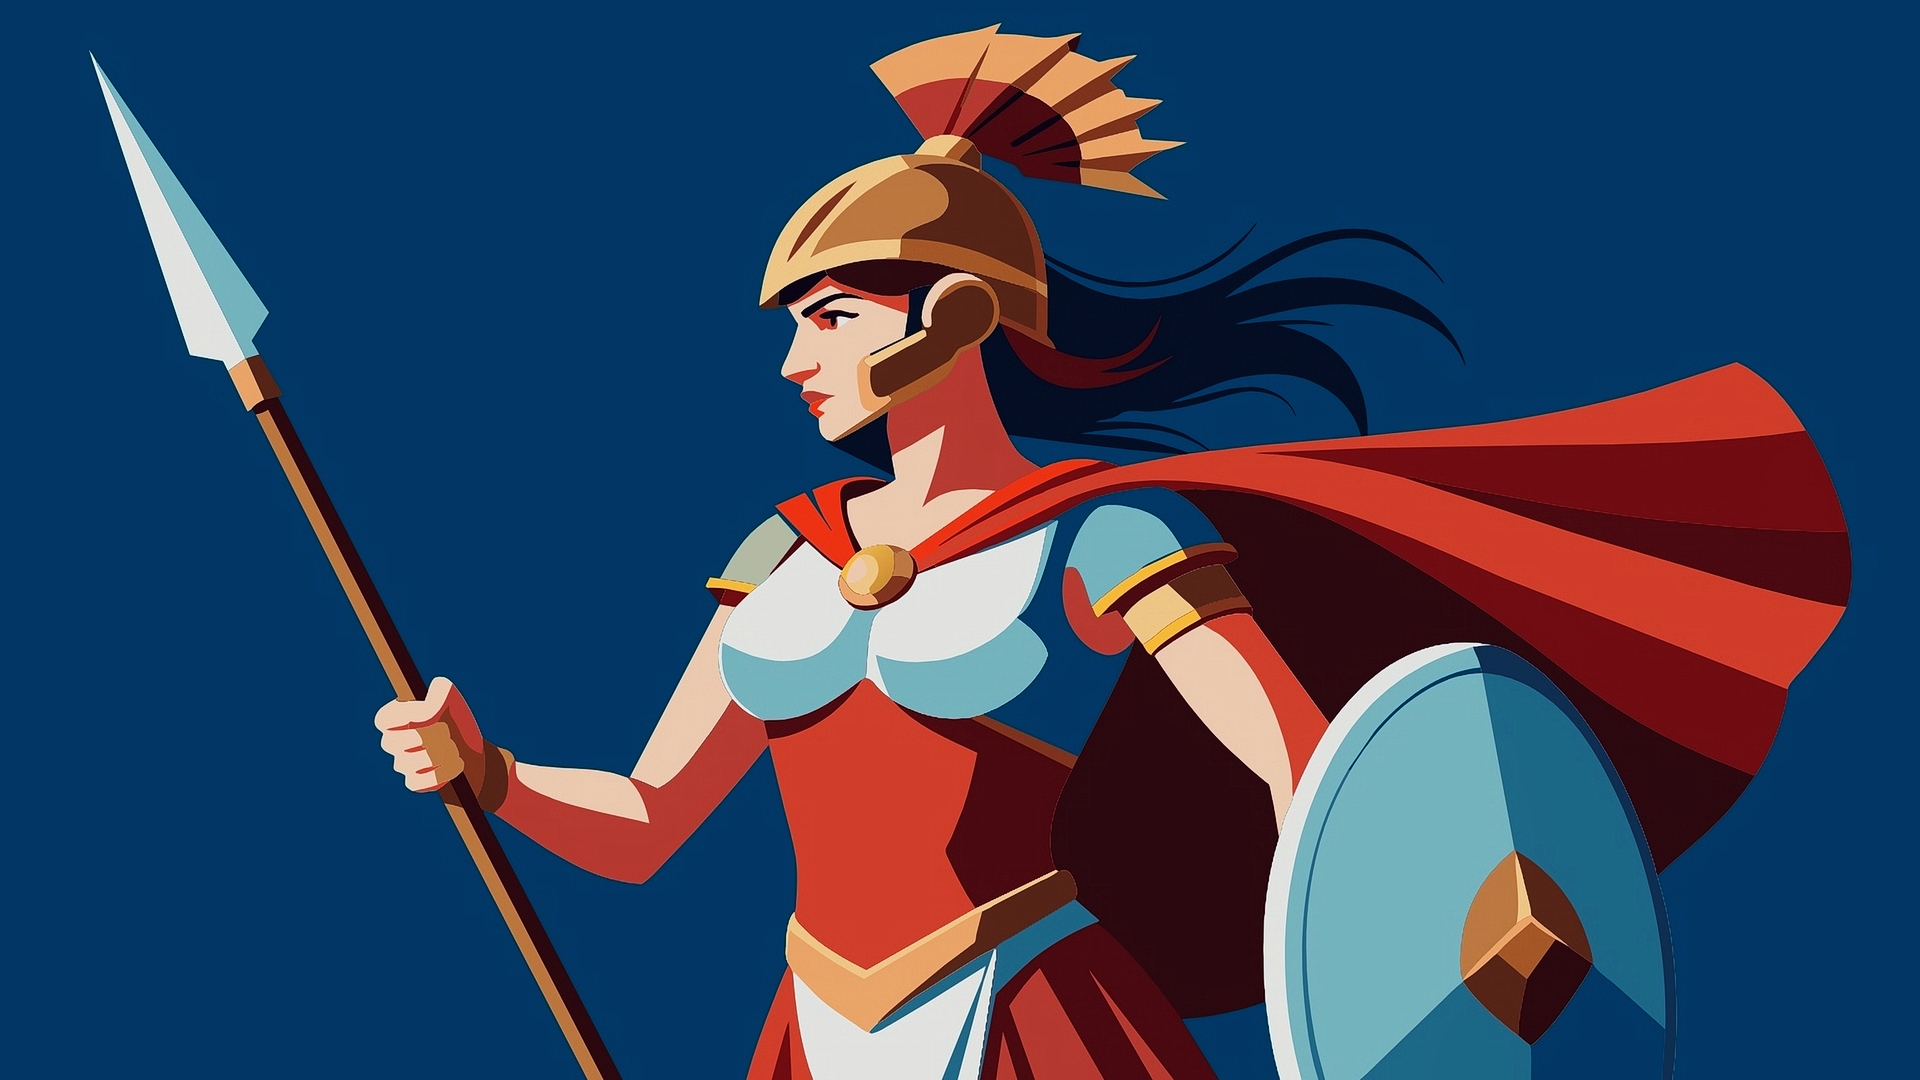 Girl warrior with spear and shield on blue background